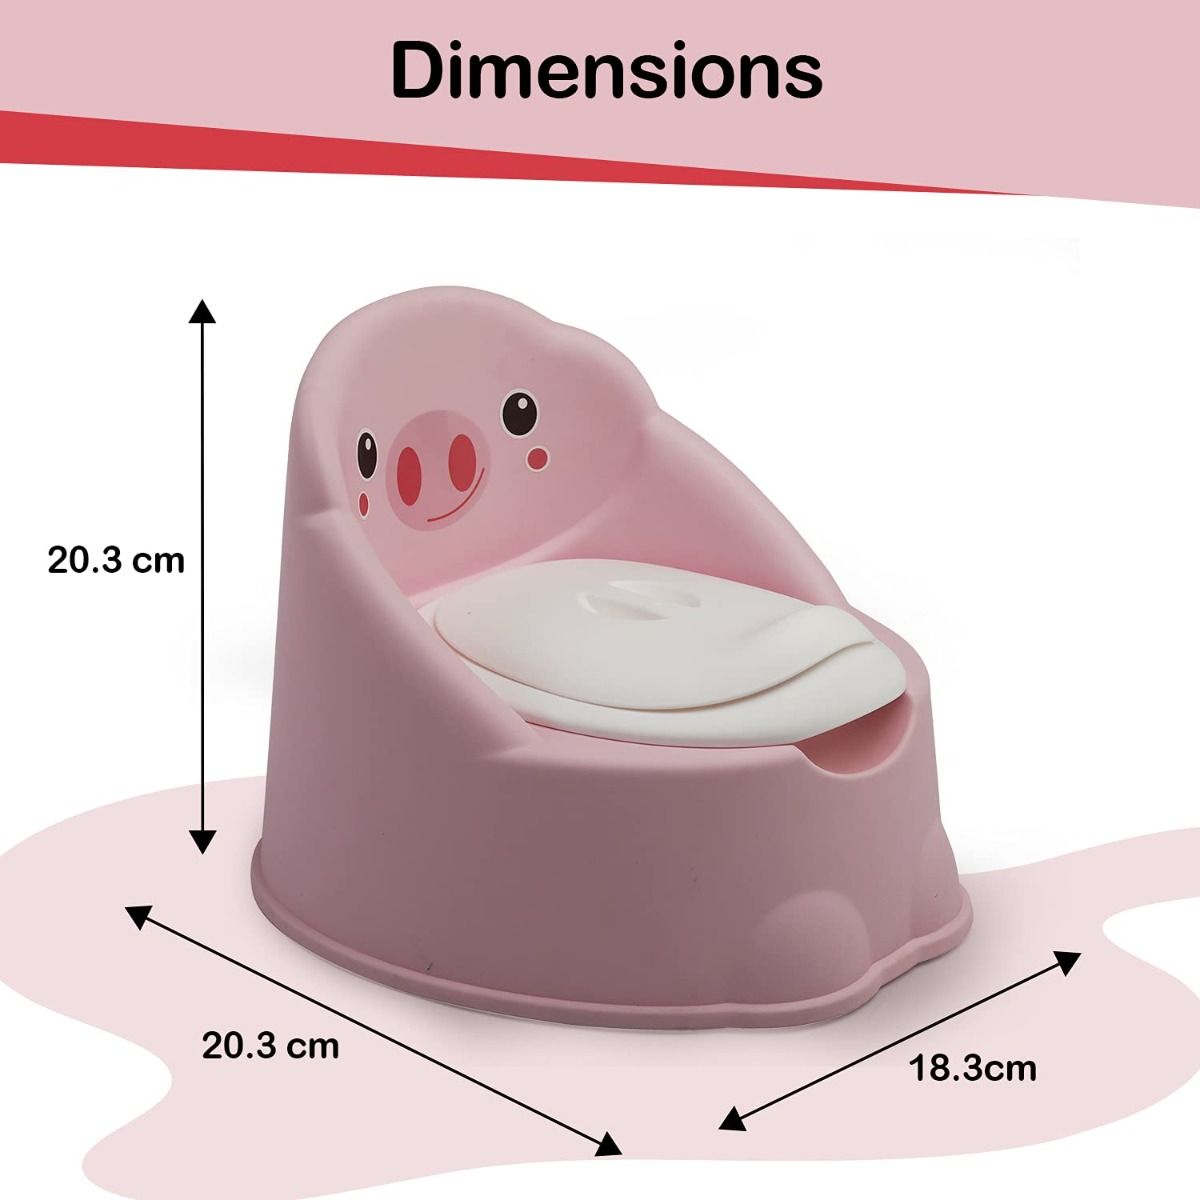 Wee Piggy Potty Seat, Pink